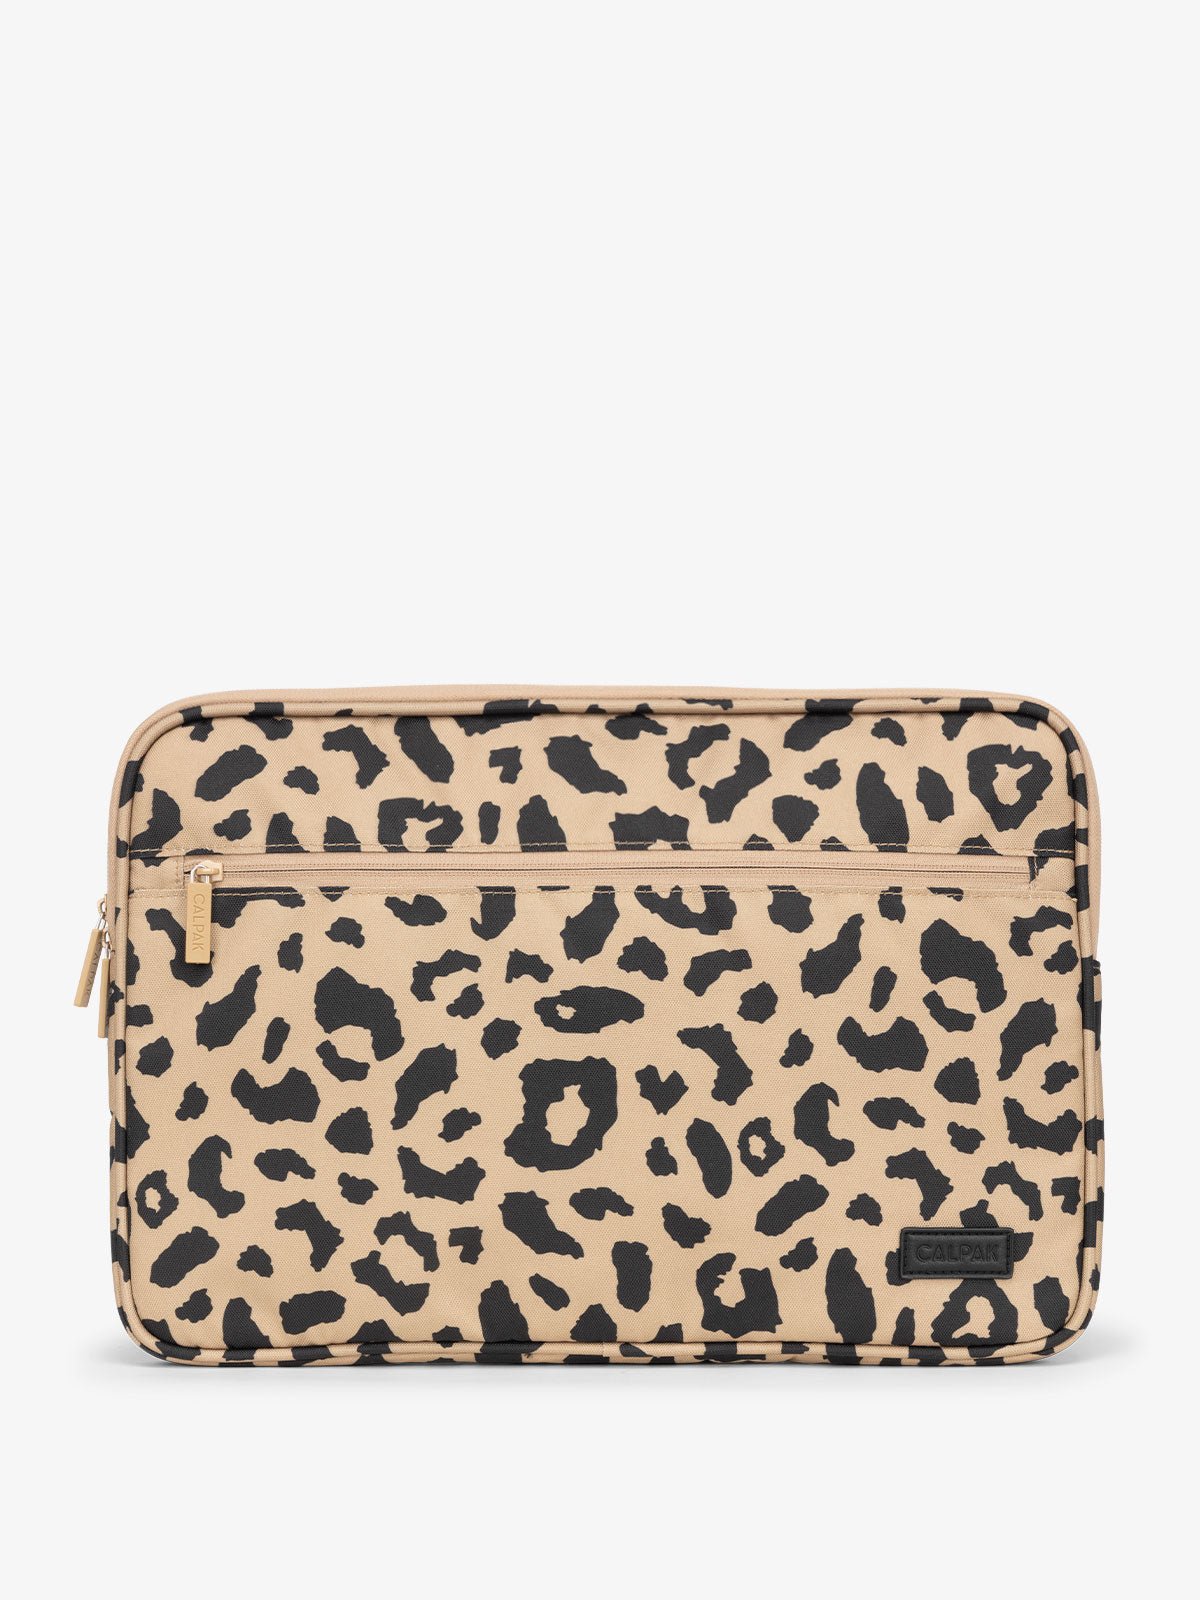 CALPAK 15-17 Inch protective Laptop case with padded pockets in cheetah print